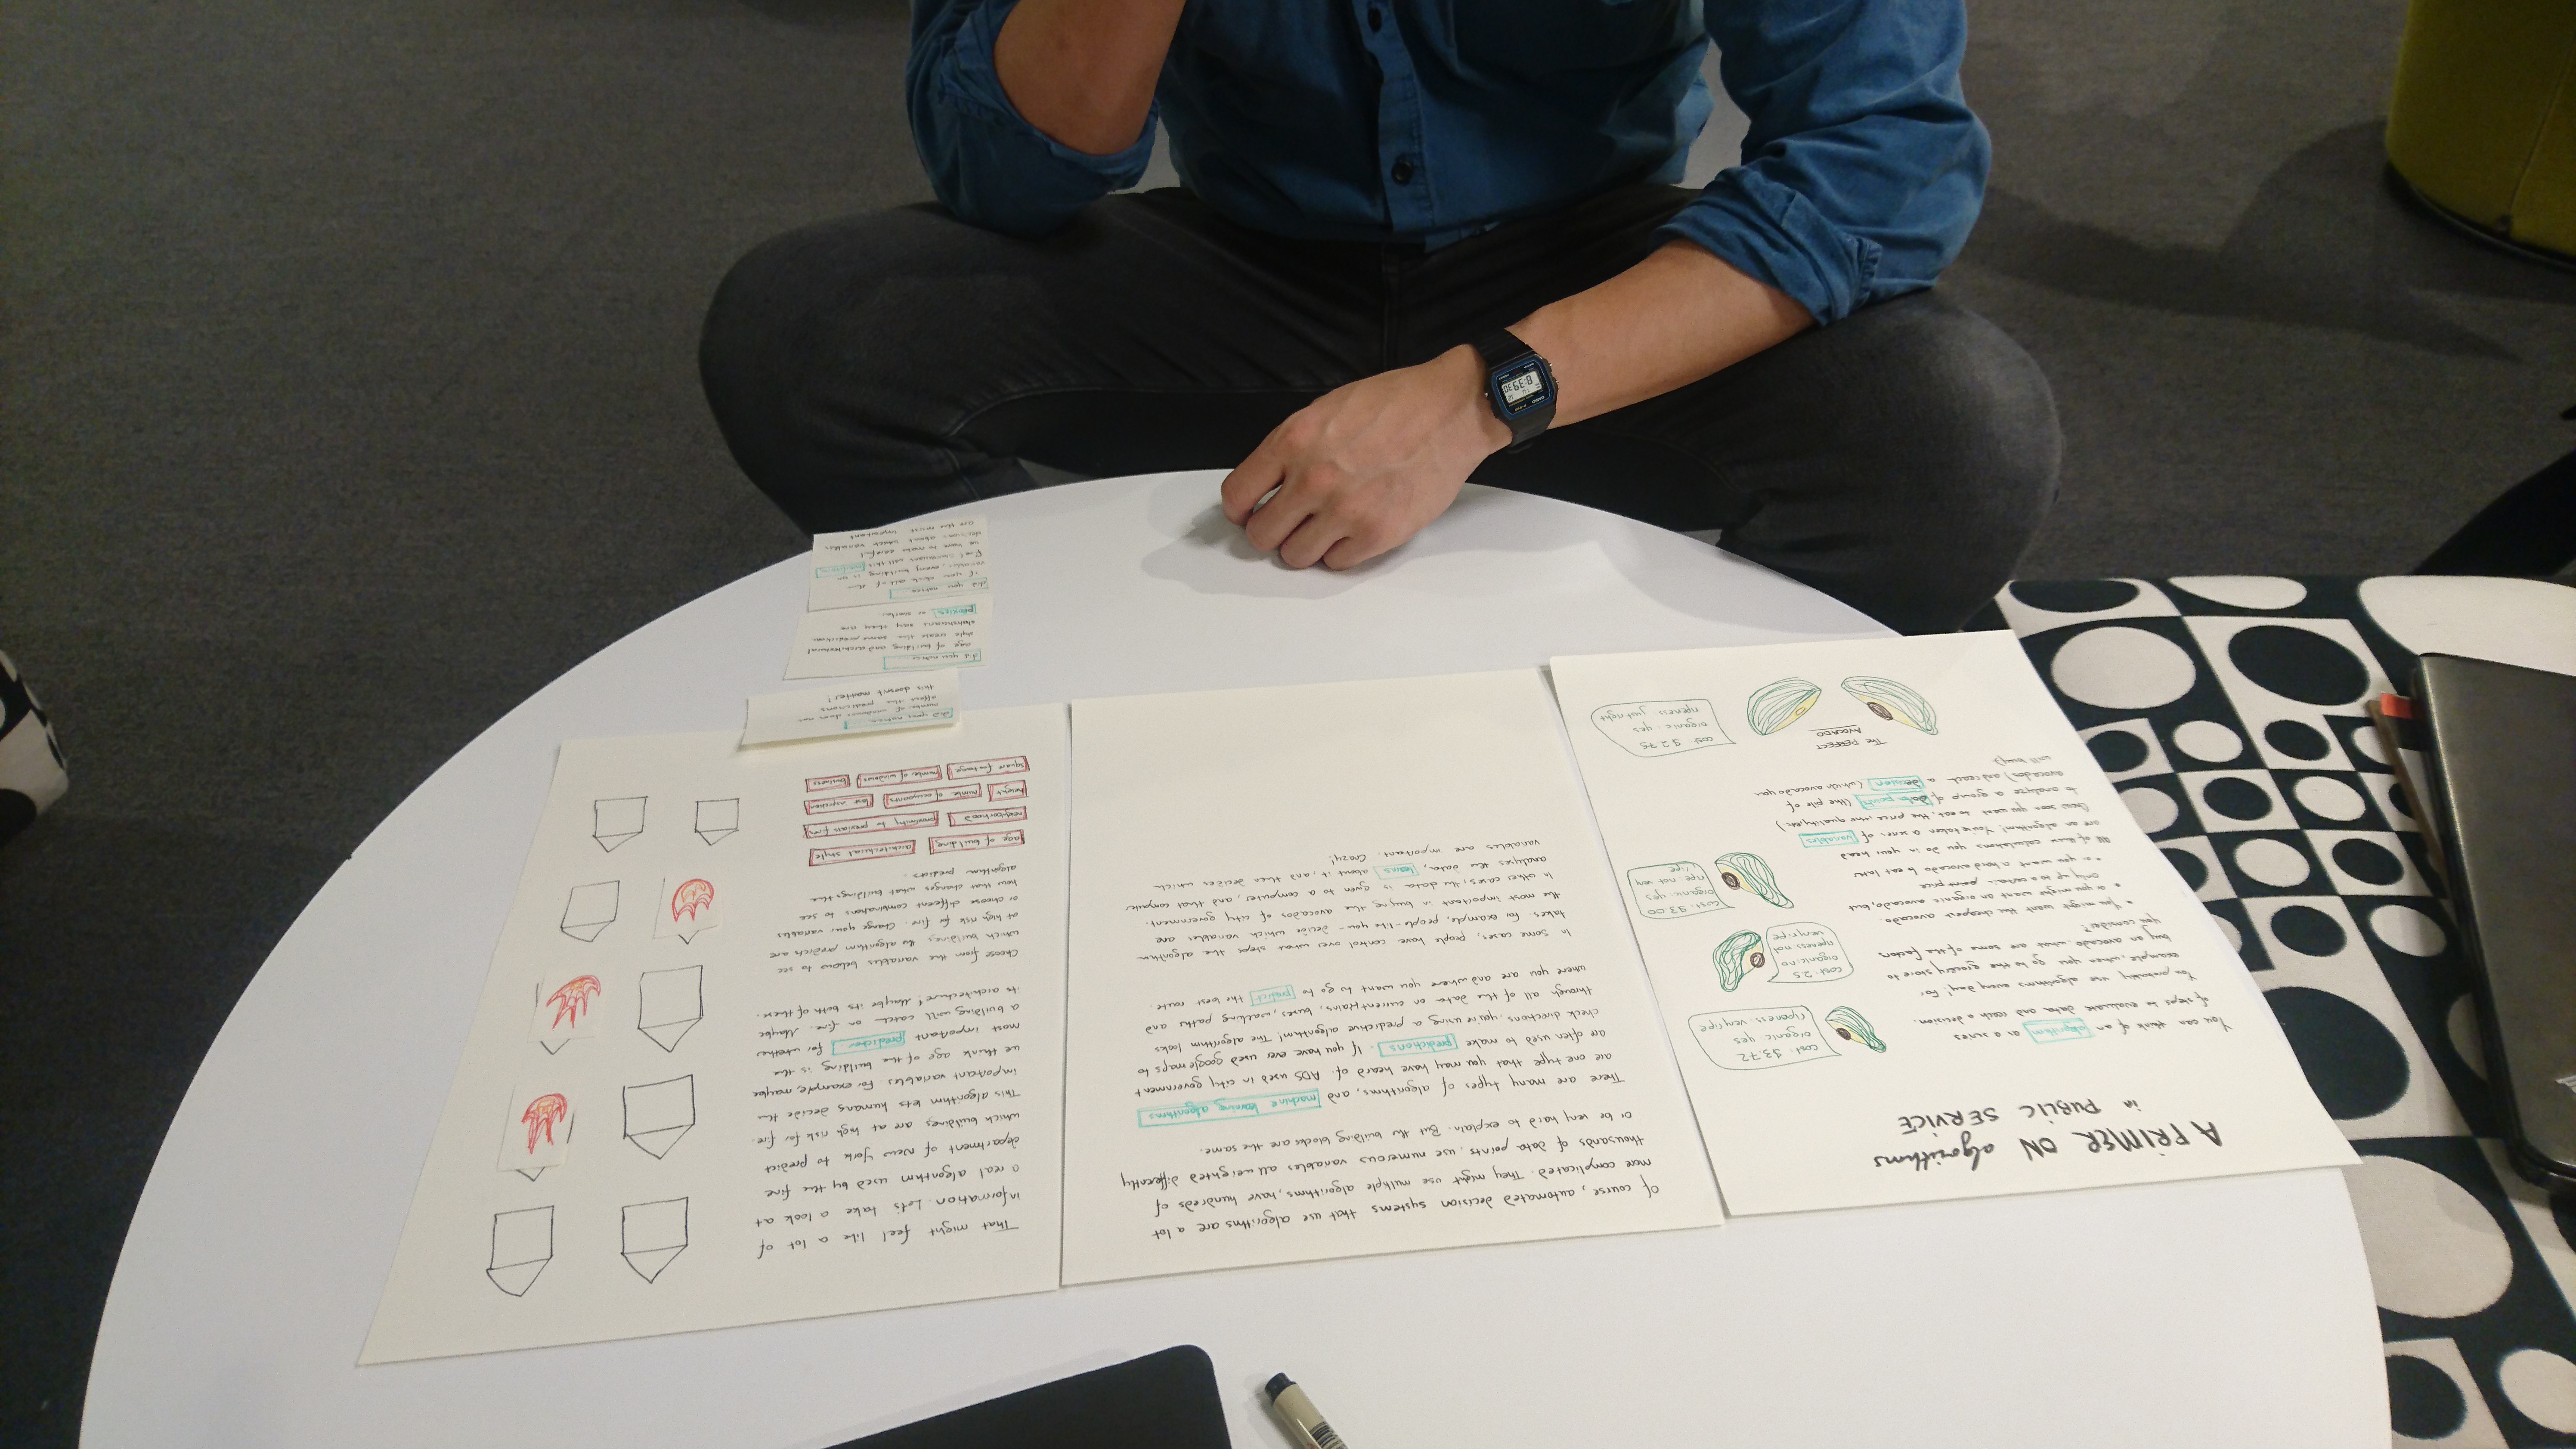 an image of a person sitting in front a table with pieces of paper in front of them. the papers have drawings of avocados on them.